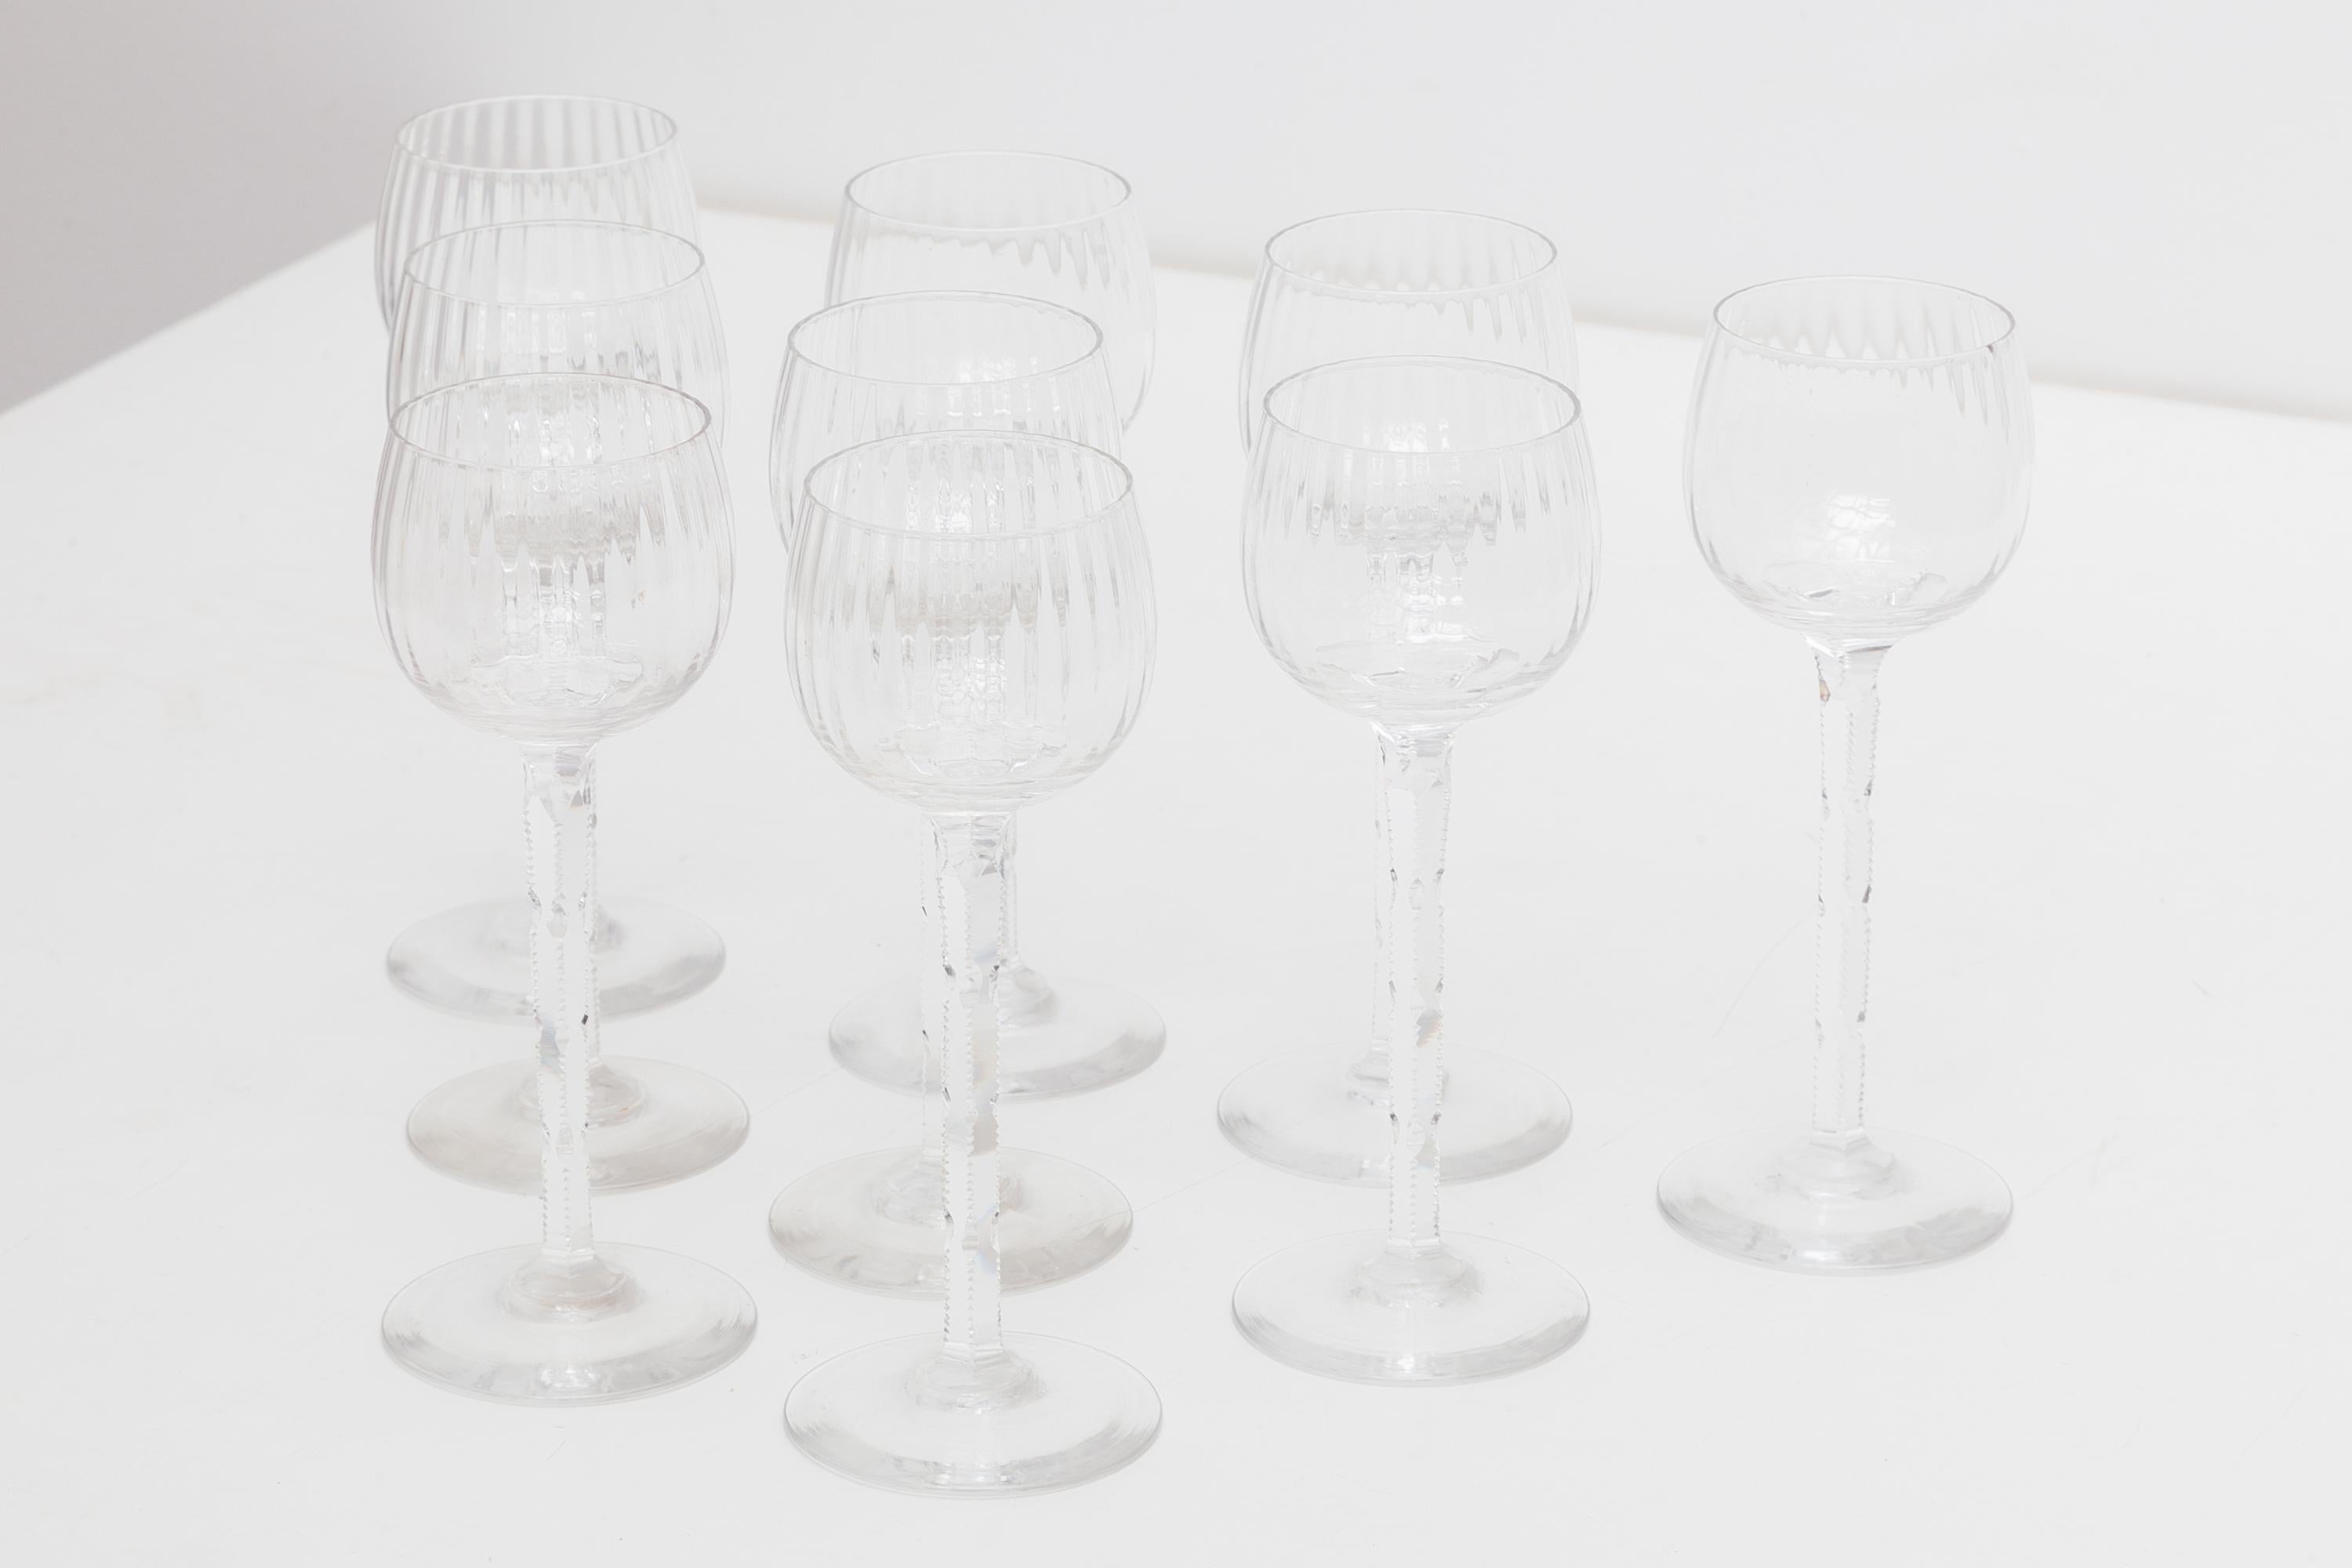 Vintage mid-century set of crystal glassware. Long stem with hand cut design. Dimensions: 7 W x 19 H cm.